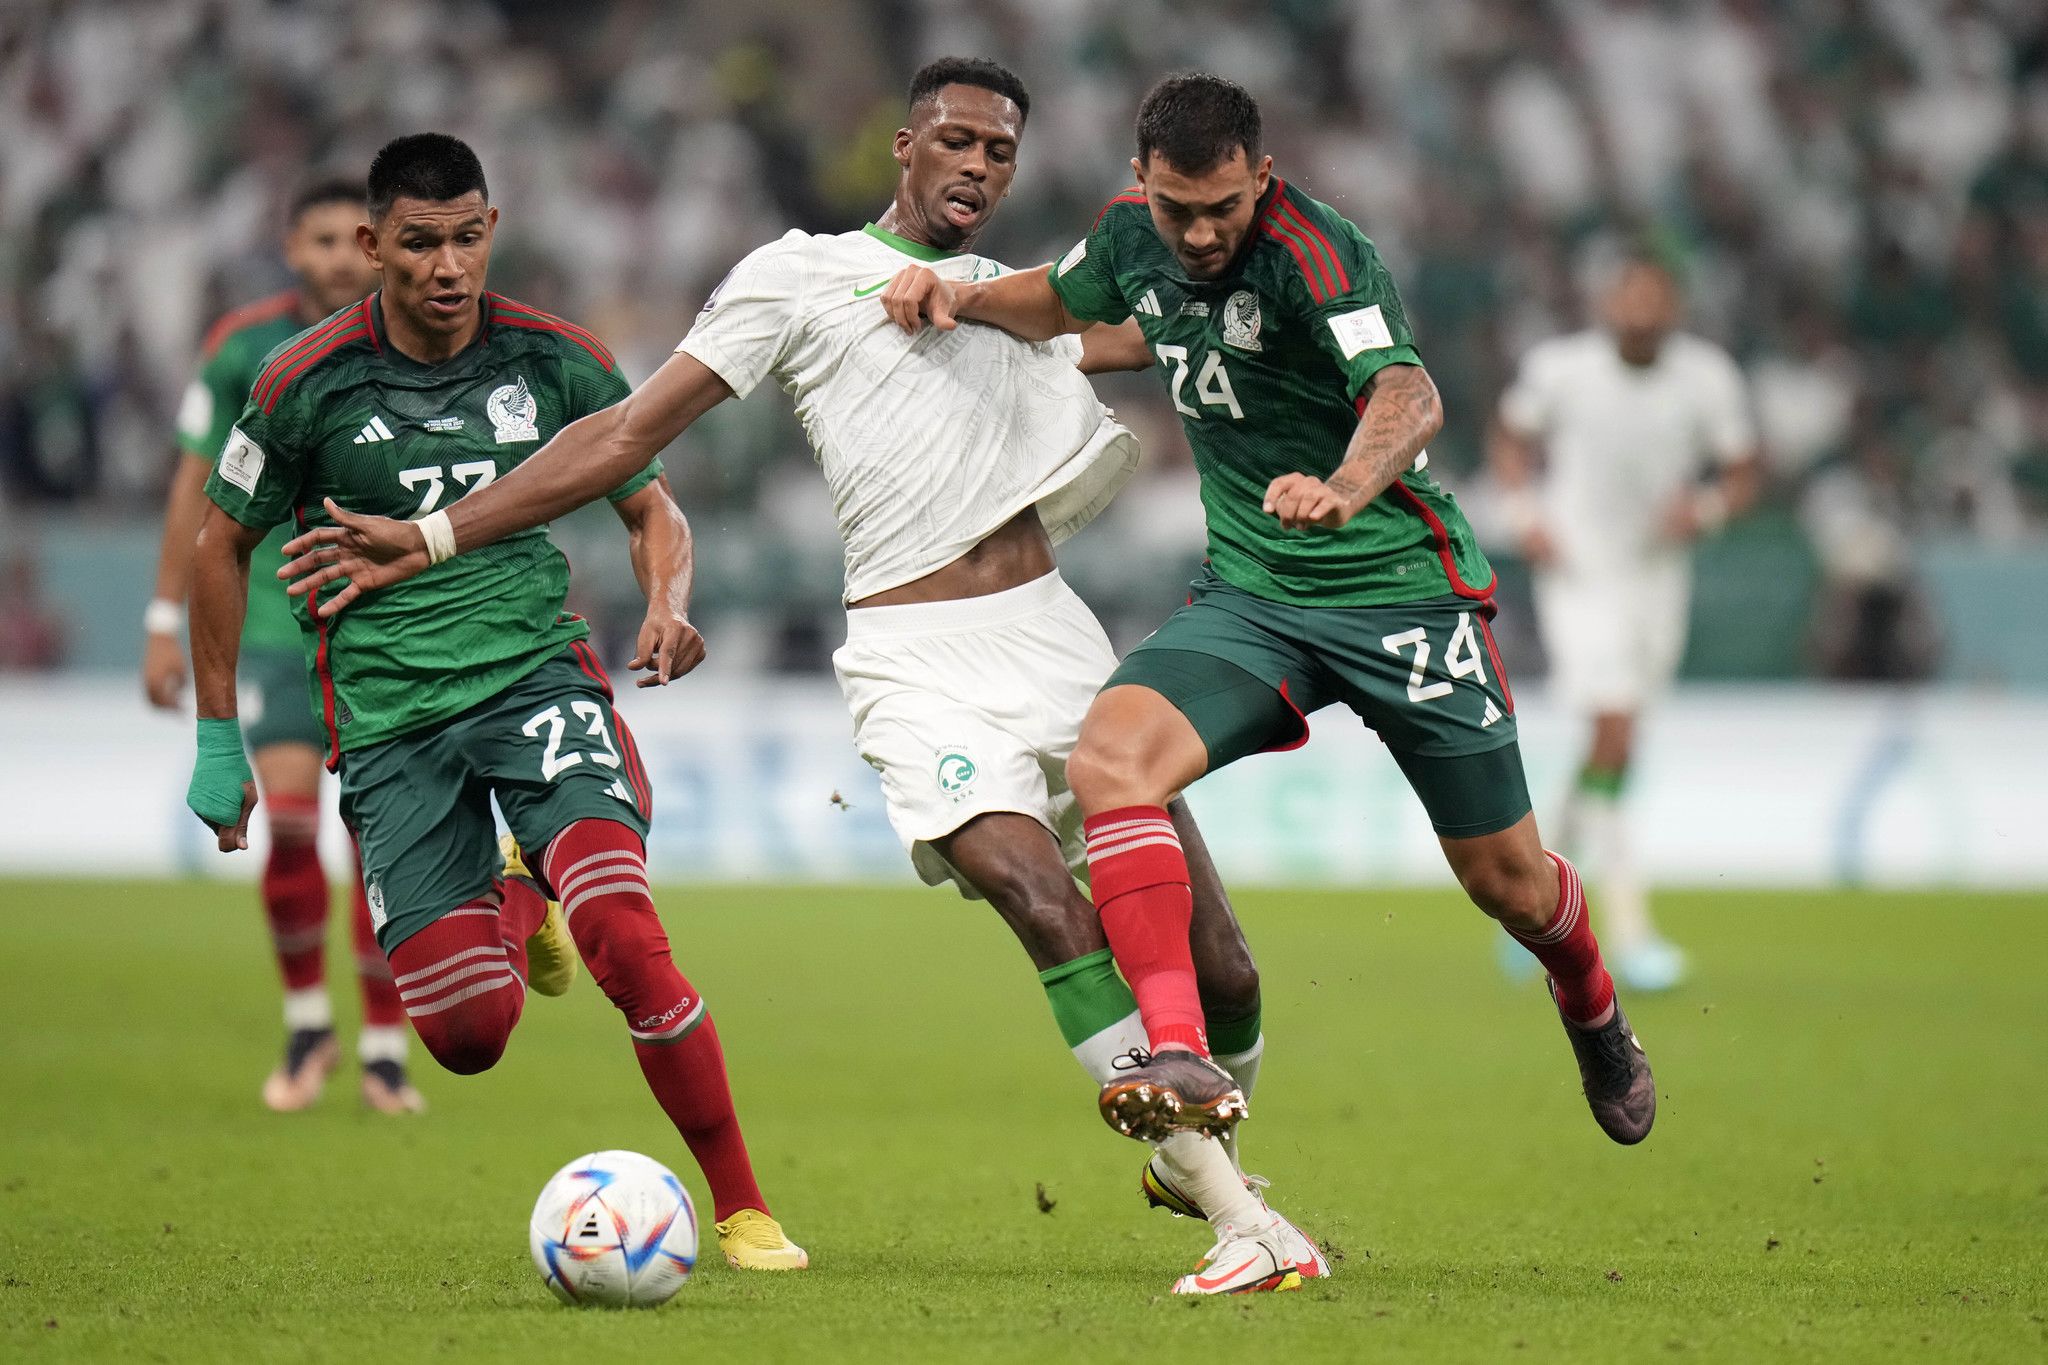 Mexico defeats Saudi Arabia 2-1 at 2022 World Cup, but does not make it out of the group